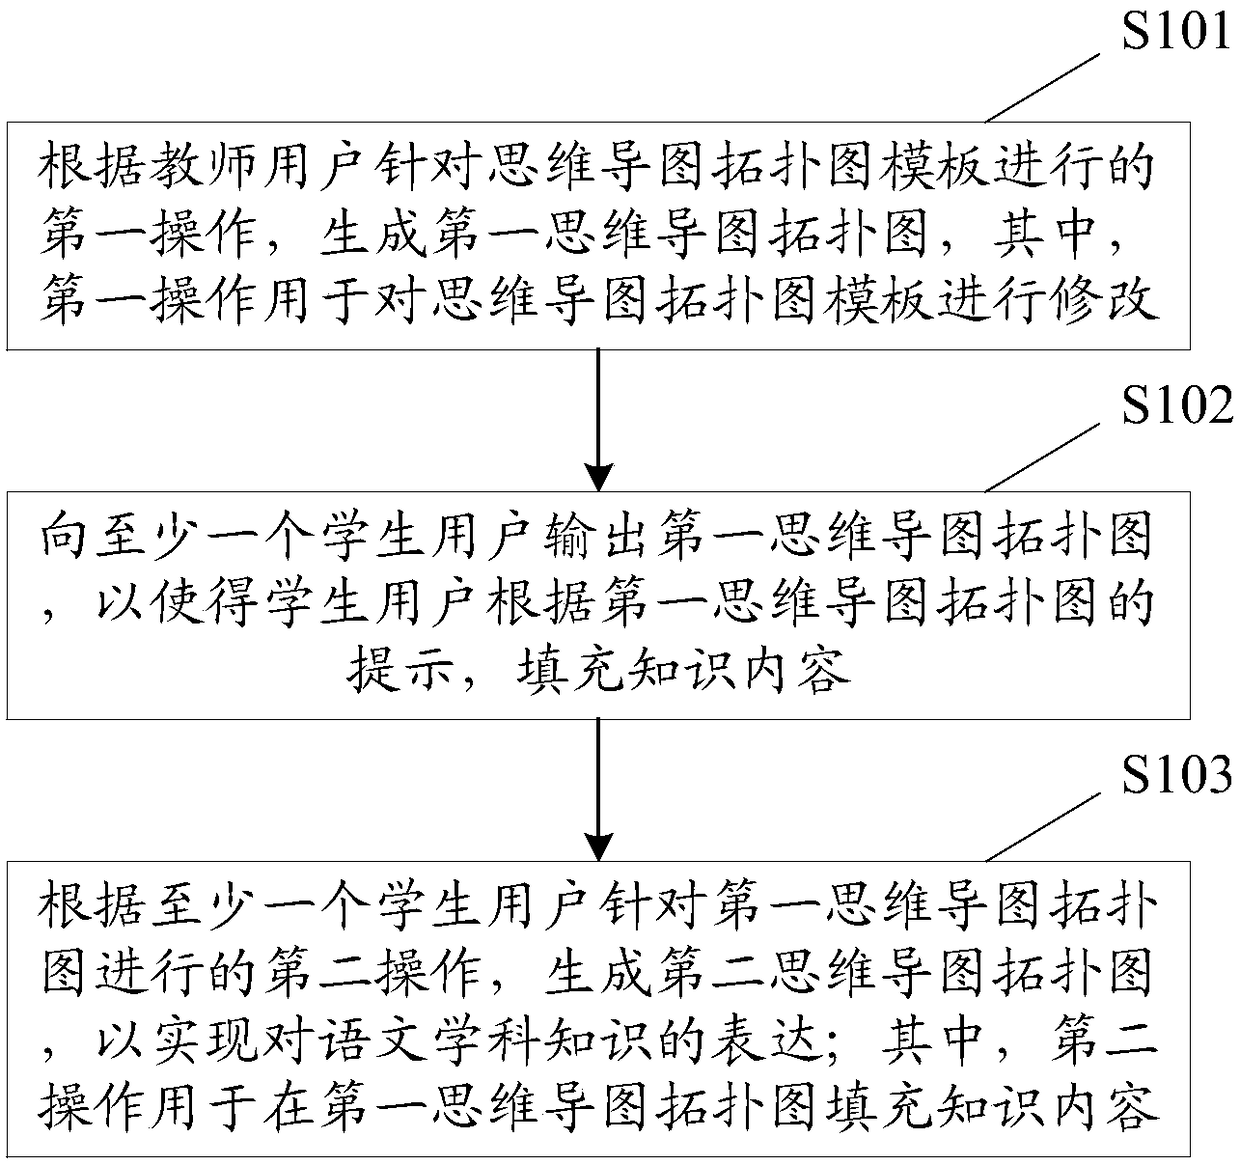 Subject knowledge expression method and equipment